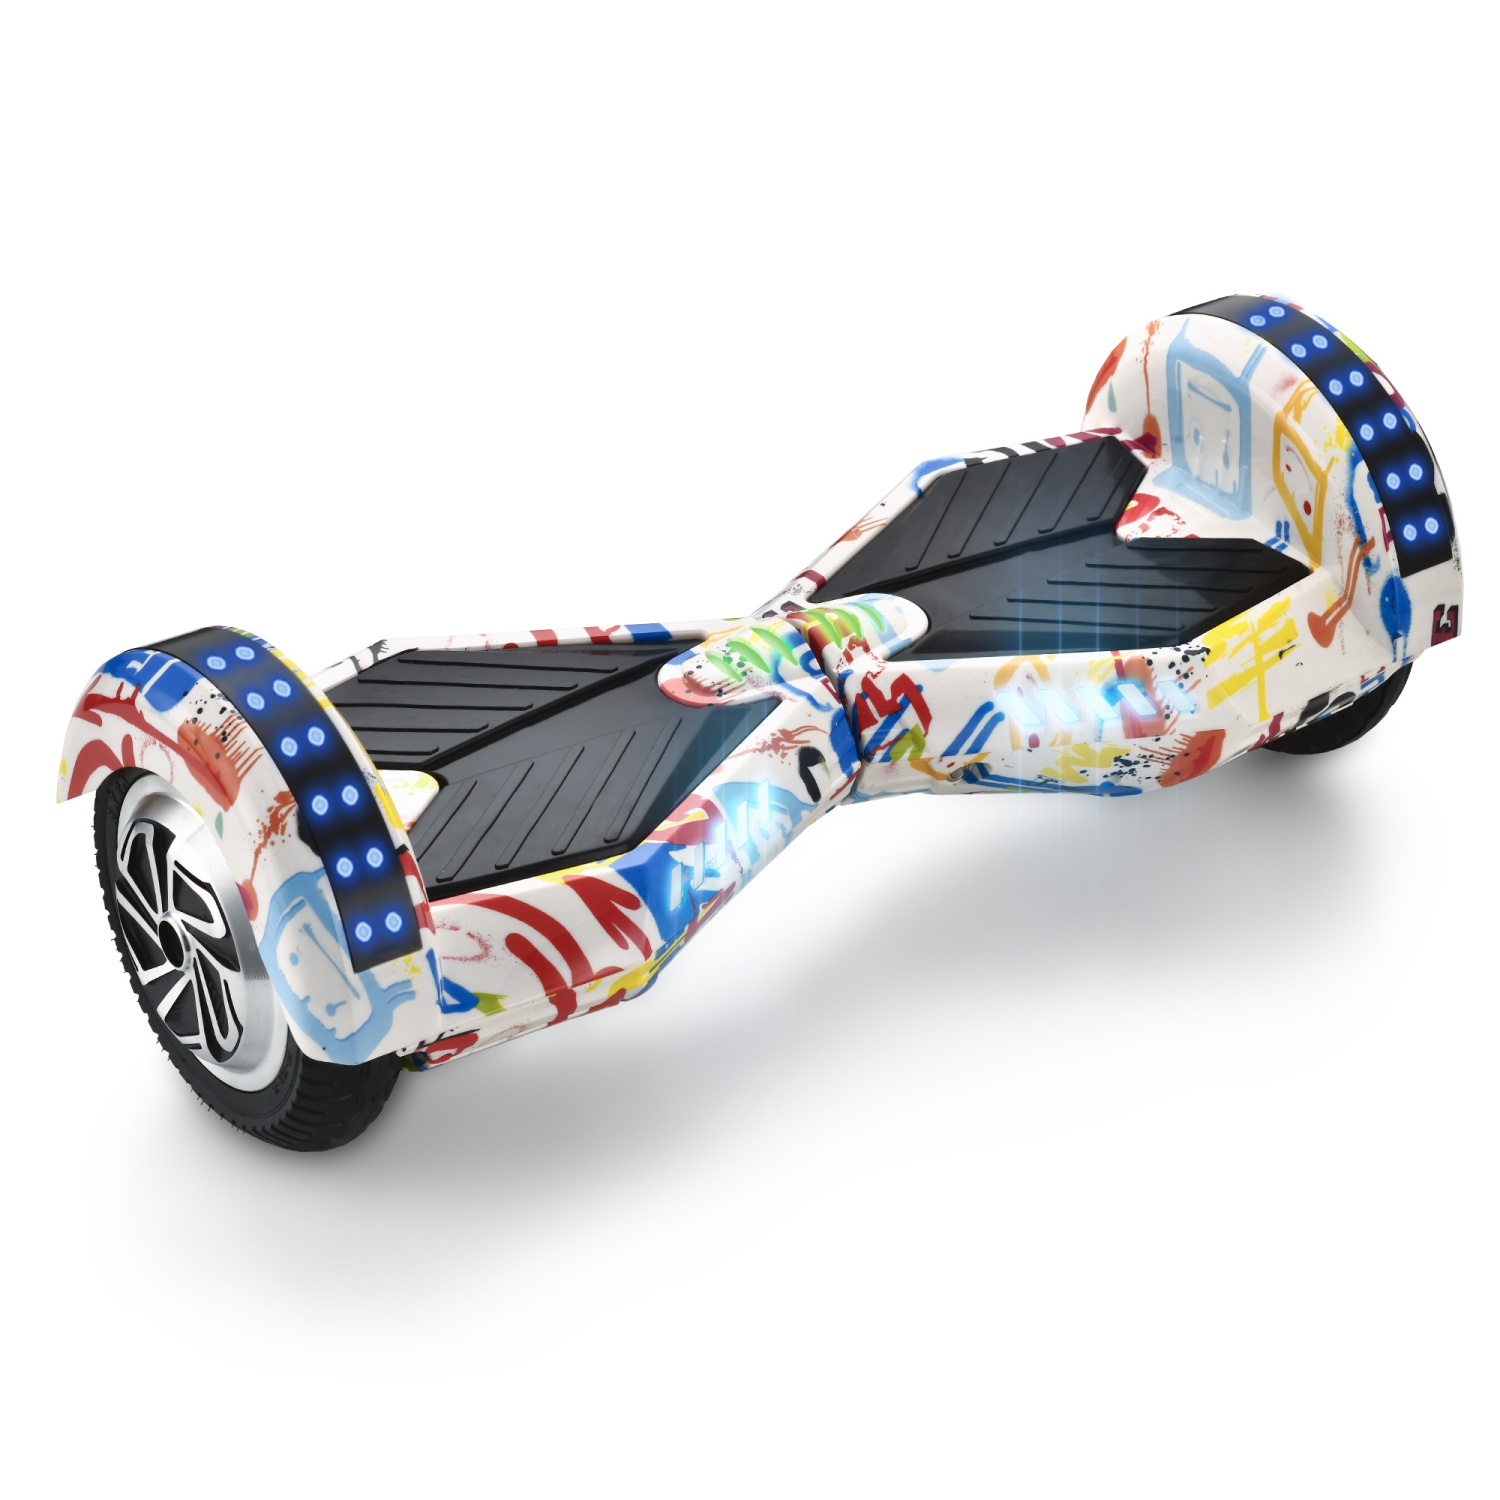 WEELMOTION 8" Off-Road Hoverboard UL 2272 certified Hoverboard for Kids and Adults with LED lights and Music Speaker 300W All Terrain Aluminum Wheel with free Hoverboard bag